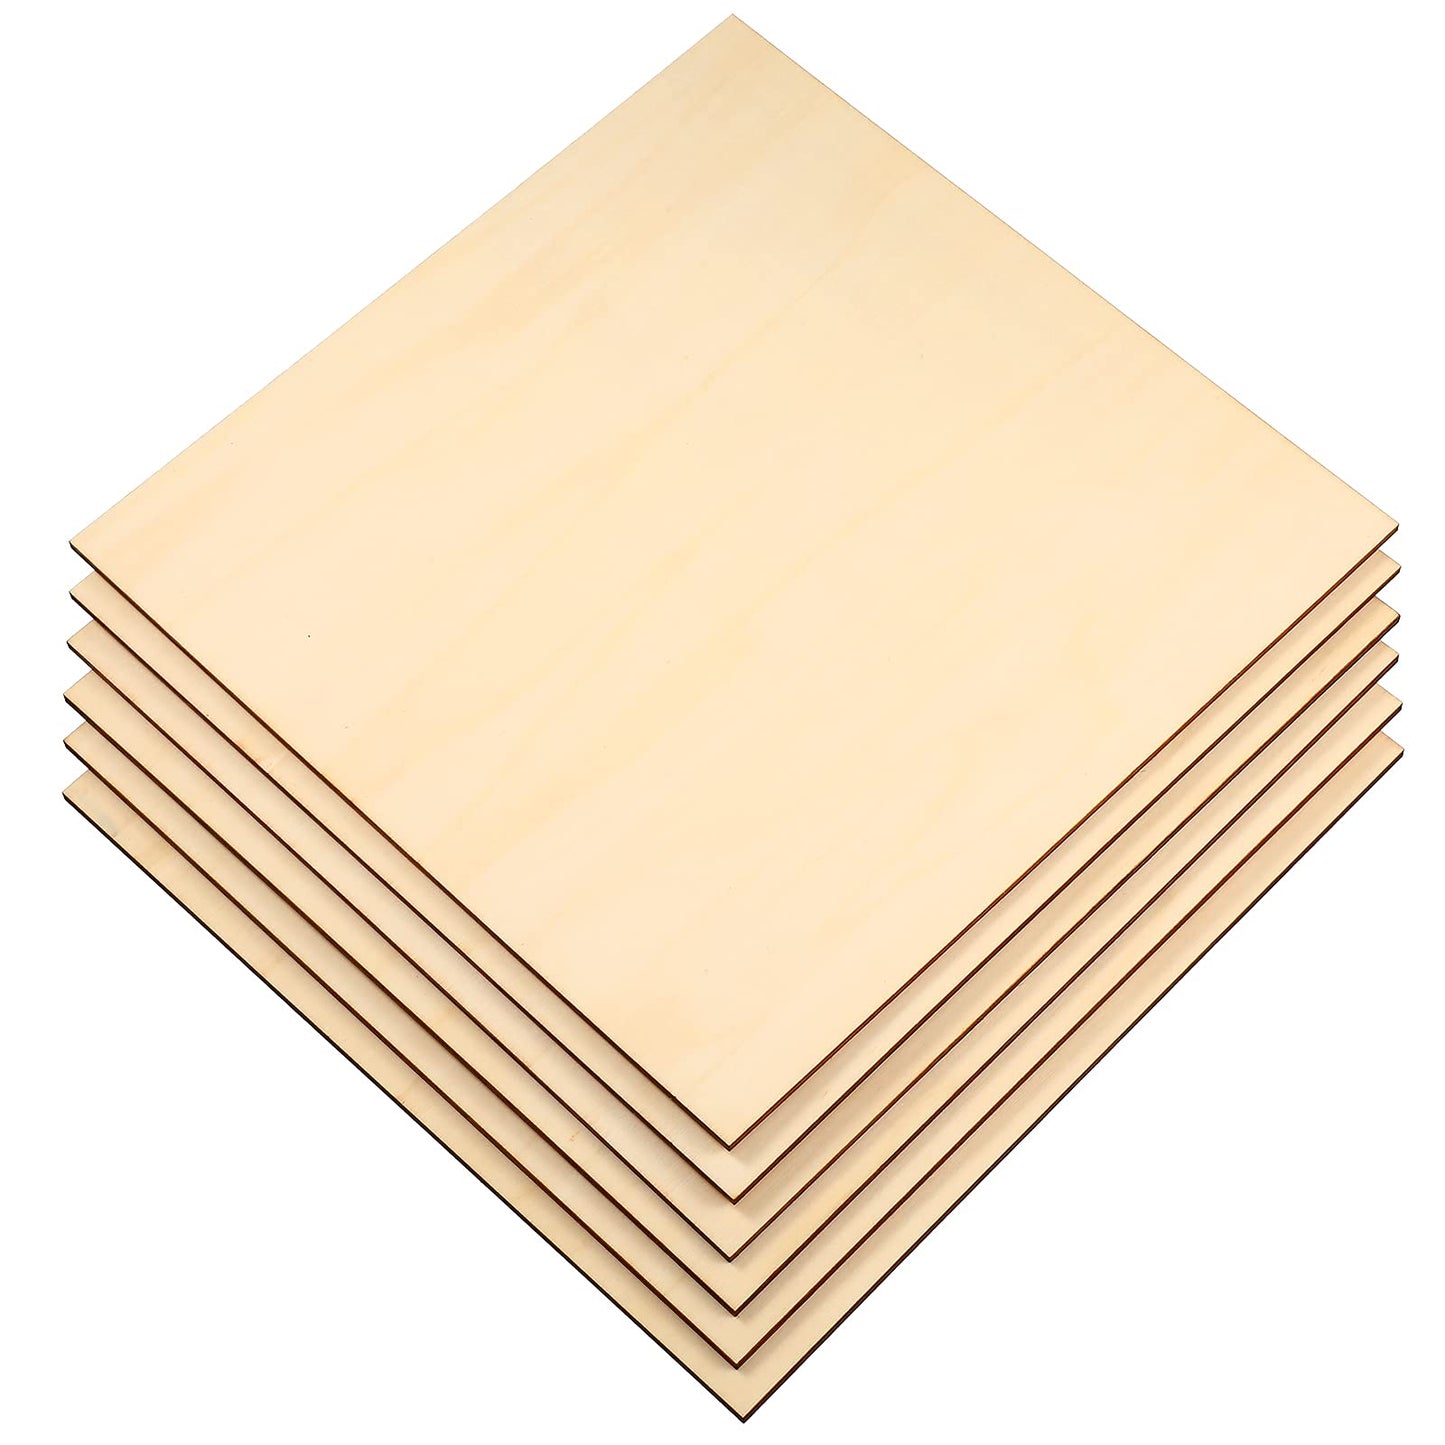 10 Pieces Wood Square Blank Wood Pieces 10x10 Inch Wooden Square Cutouts Plywood Sheets Unfinished Square Blank Wood Pieces for DIY Craft, Coaster,